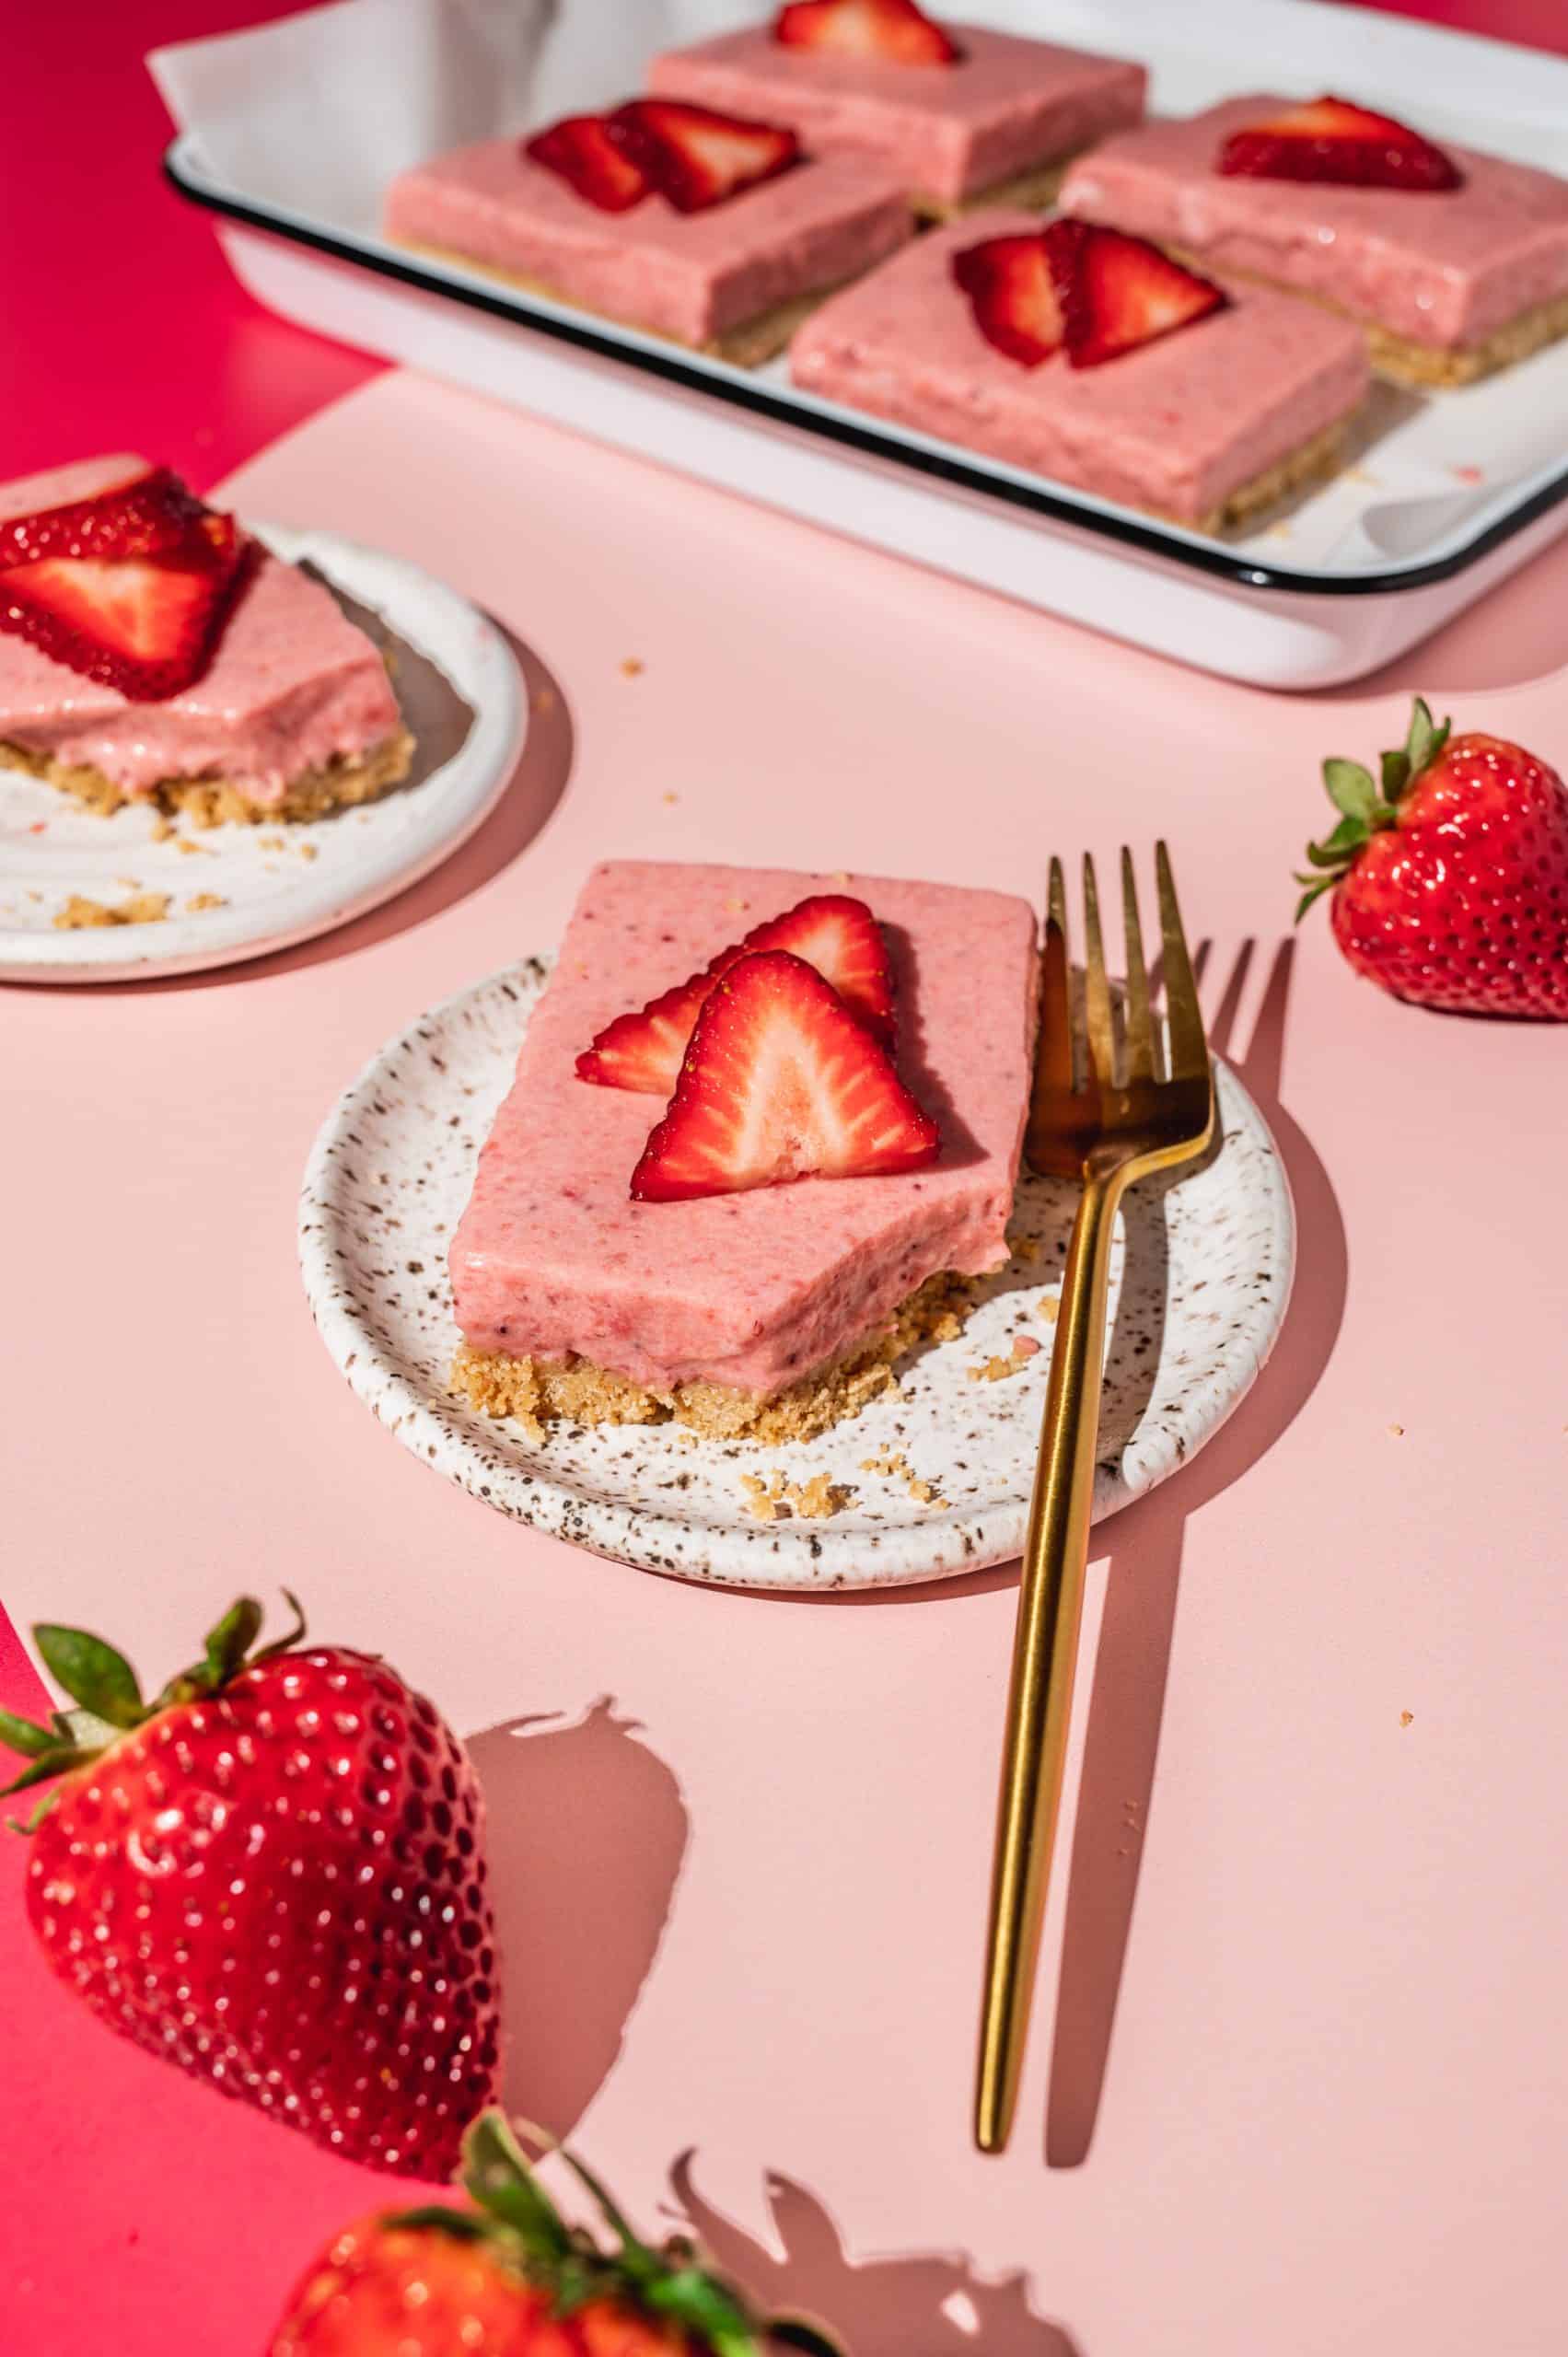 strawberry pie bar on a plate with a bite taken out, tray with more strawberry bars in the background